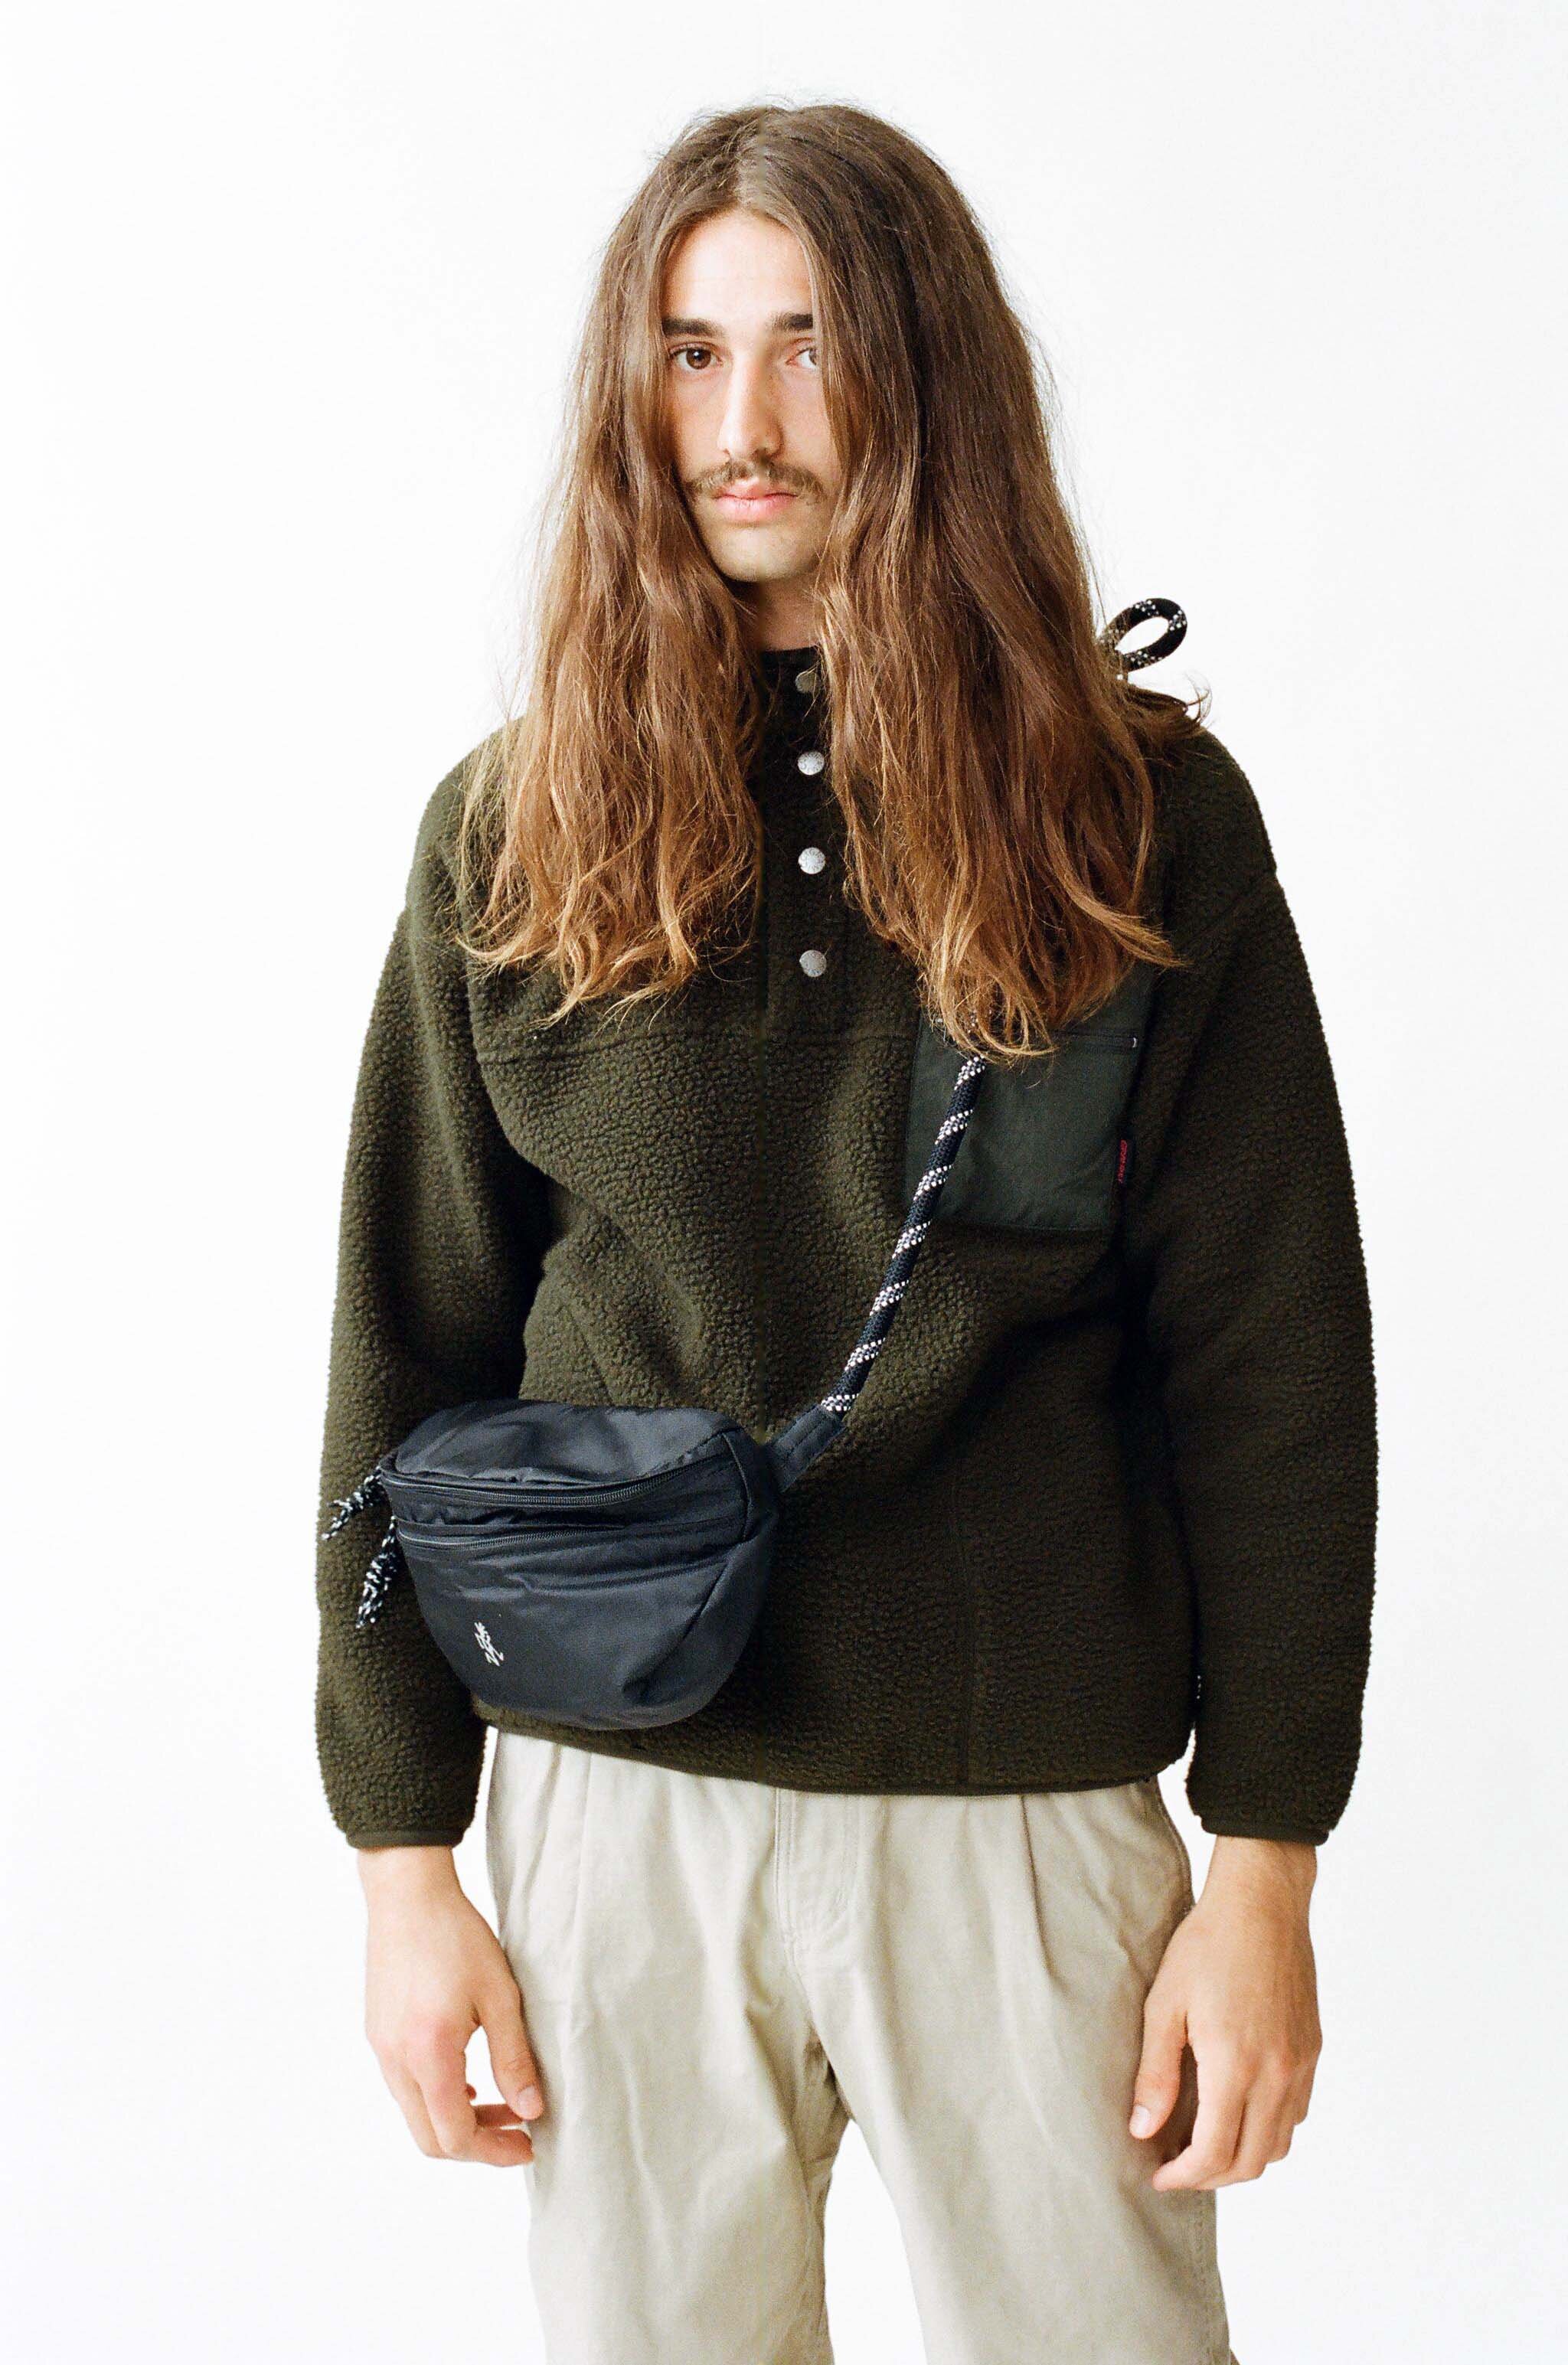 Deru Store Highlights Autumn/Winter '20 Wares from nanamica, and Wander ...